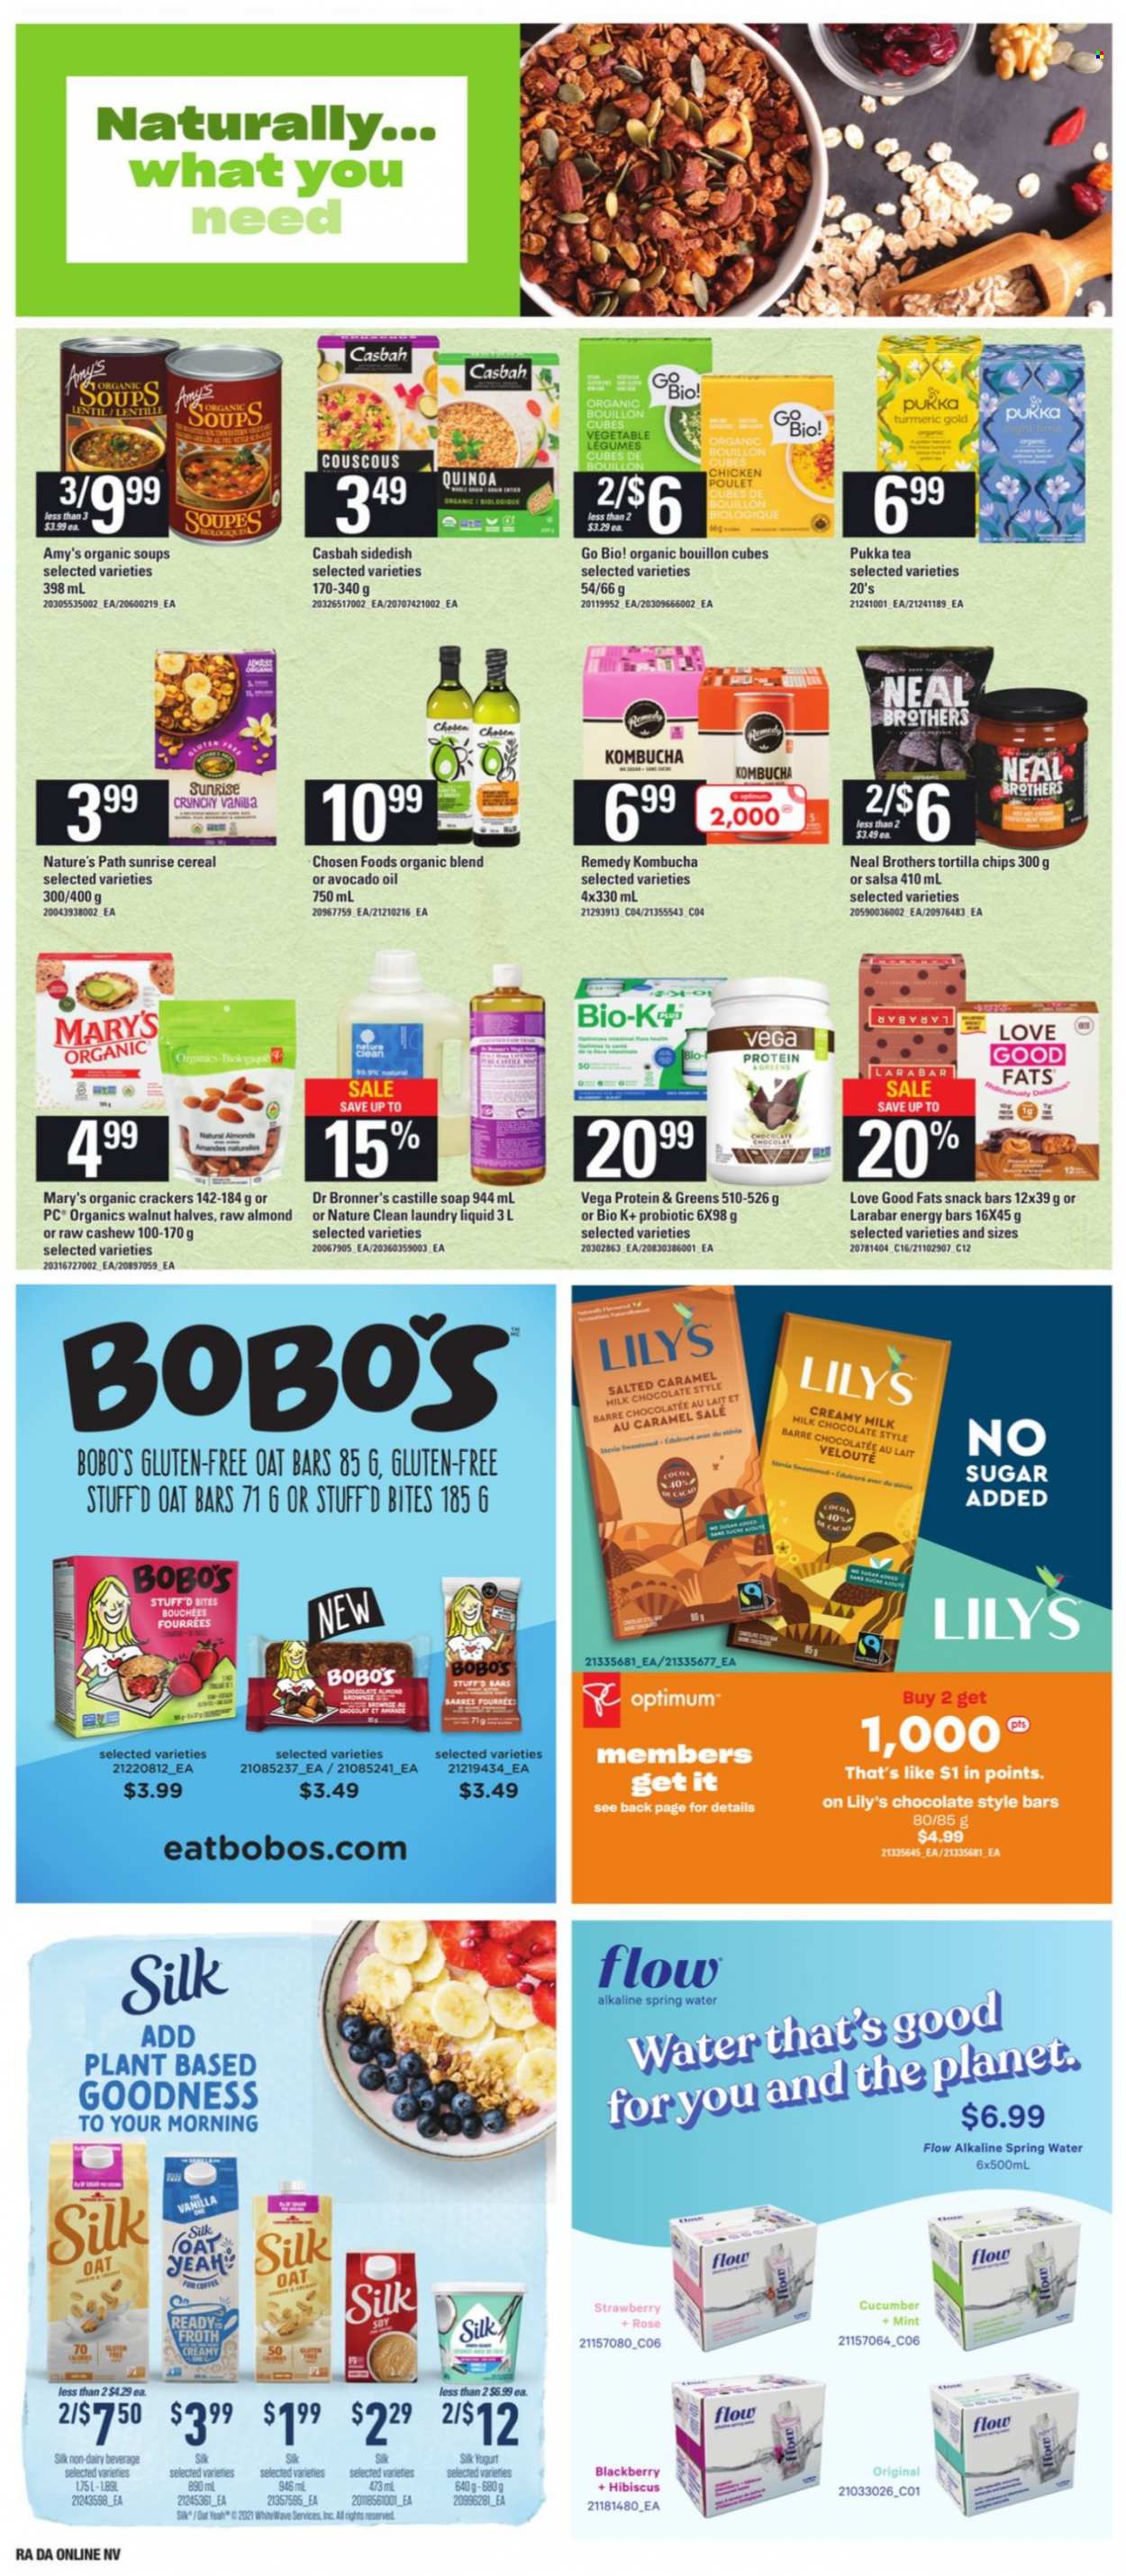 thumbnail - Atlantic Superstore Flyer - October 21, 2021 - October 27, 2021 - Sales products - yoghurt, Silk, milk chocolate, chocolate, snack, crackers, snack bar, tortilla chips, bouillon, cocoa, sugar, stevia, cereals, energy bar, turmeric, salsa, avocado oil, oil, walnuts, spring water, kombucha, tea, wine, rosé wine, BROTHERS, laundry detergent, soap, Optimum, rose, couscous, quinoa, chips. Page 10.